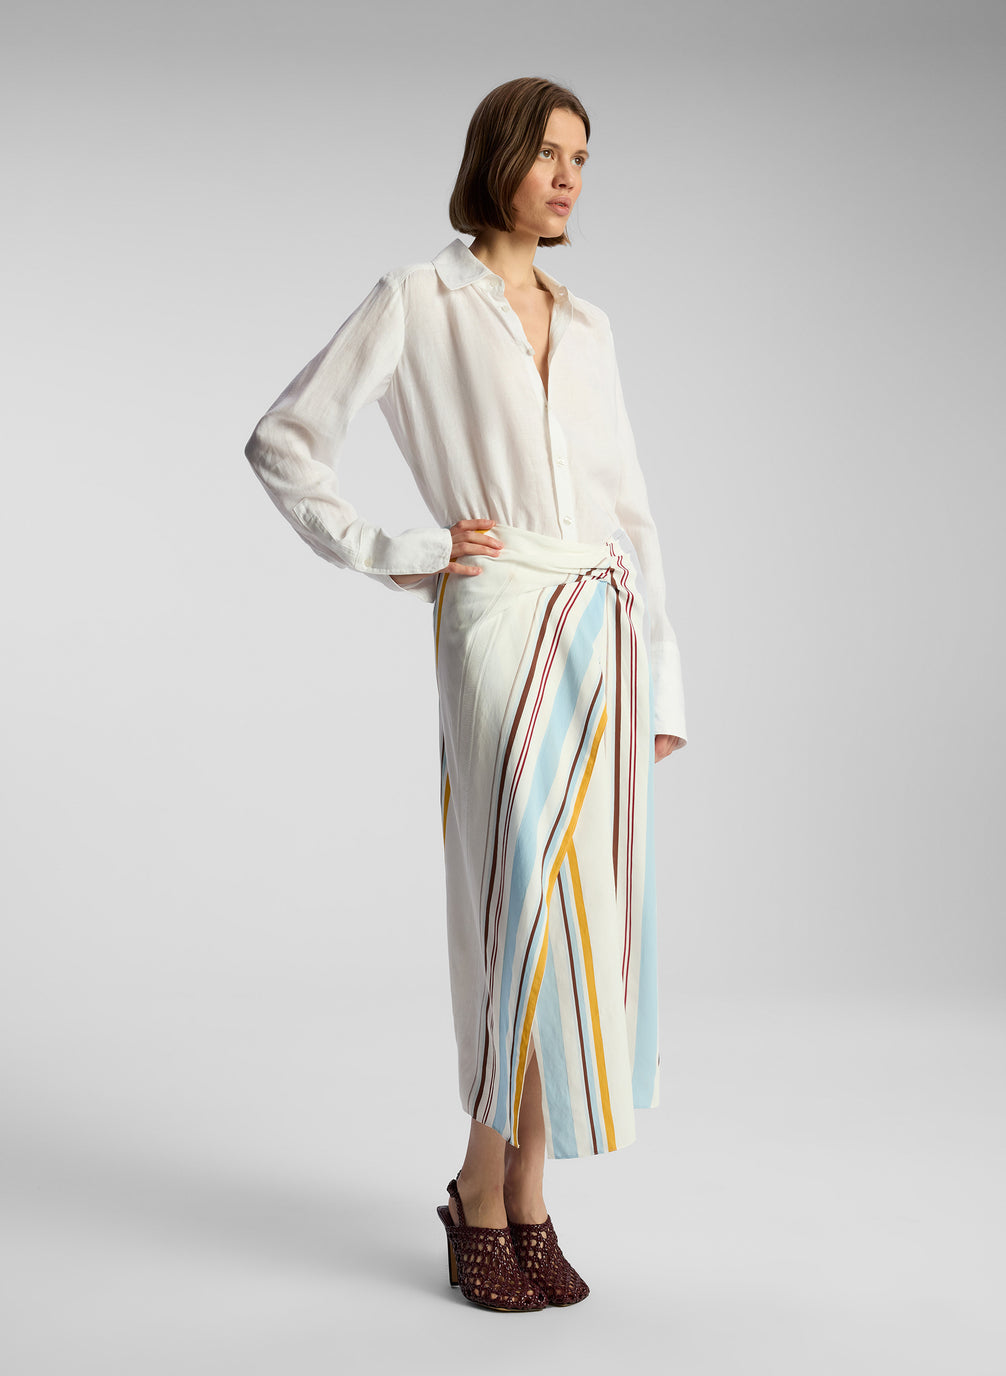 side view of woman wearing white button down shirt and multicolor striped skirt